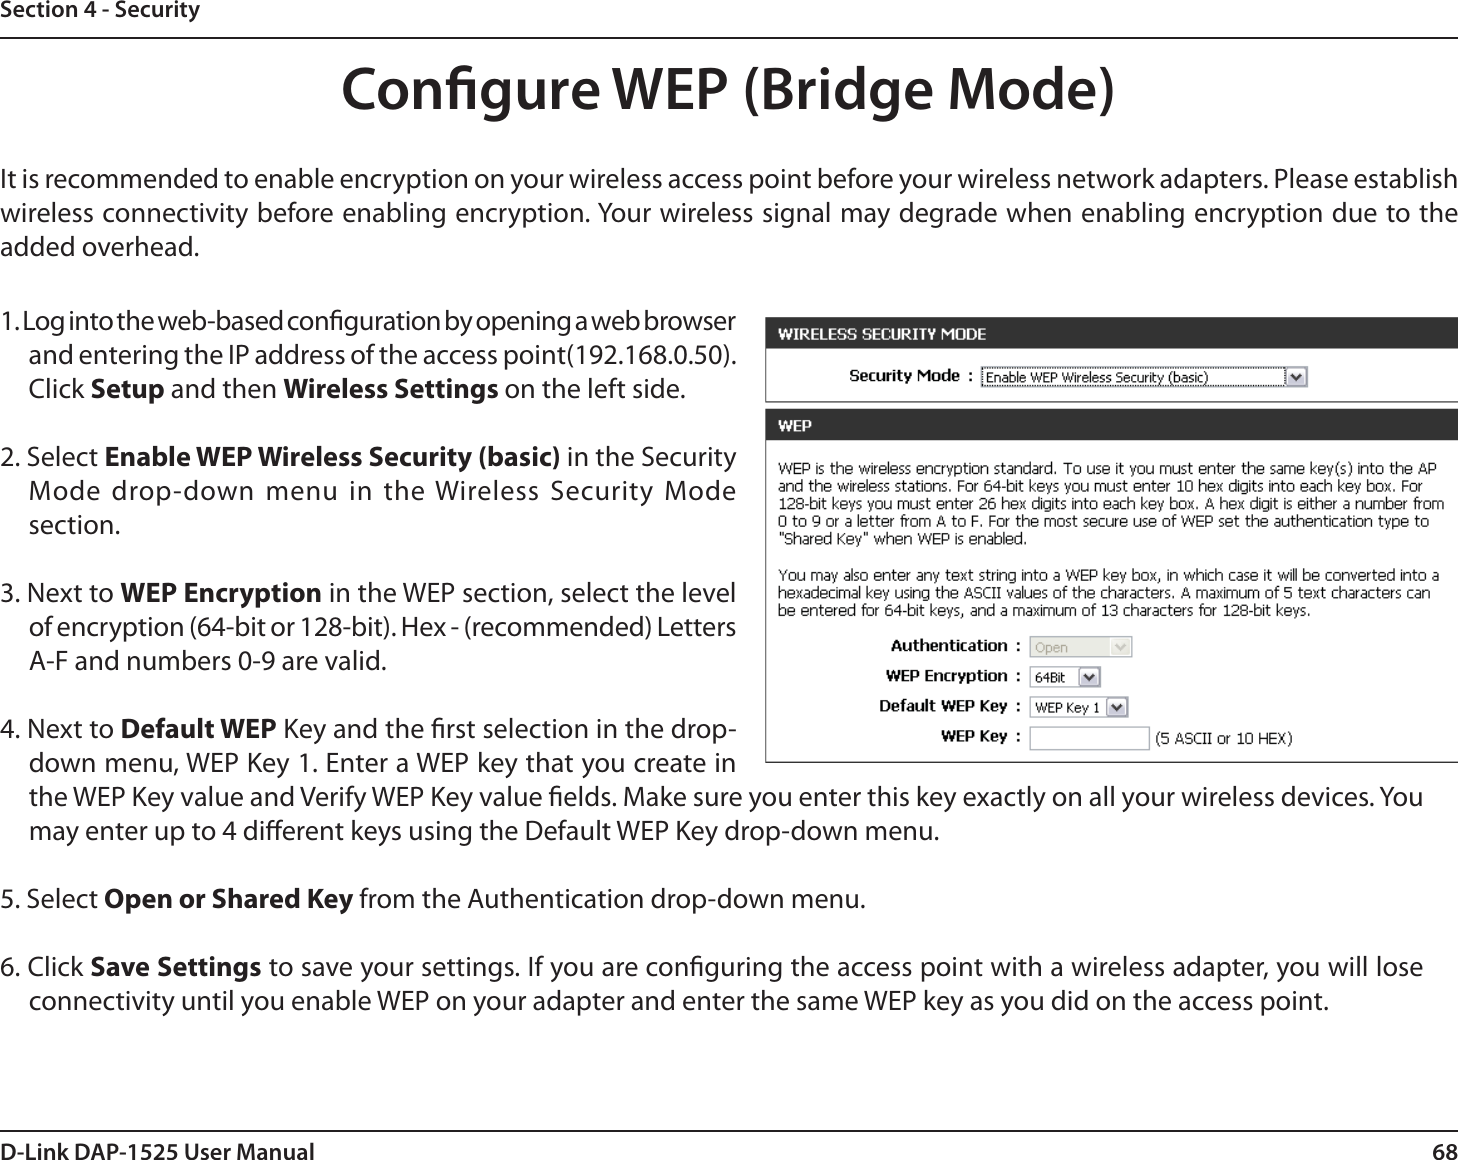 68D-Link DAP-1525 User ManualSection 4 - SecurityCongure WEP (Bridge Mode)It is recommended to enable encryption on your wireless access point before your wireless network adapters. Please establish wireless connectivity before enabling encryption. Your wireless signal may degrade when enabling encryption due to the added overhead.1. Log into the web-based conguration by opening a web browser and entering the IP address of the access point(192.168.0.50). Click Setup and then Wireless Settings on the left side.2. Select Enable WEP Wireless Security (basic) in the Security Mode drop-down menu in the Wireless Security Mode section.3. Next to WEP Encryption in the WEP section, select the level of encryption (64-bit or 128-bit). Hex - (recommended) Letters A-F and numbers 0-9 are valid.4. Next to Default WEP Key and the rst selection in the drop-down menu, WEP Key 1. Enter a WEP key that you create in the WEP Key value and Verify WEP Key value elds. Make sure you enter this key exactly on all your wireless devices. You may enter up to 4 dierent keys using the Default WEP Key drop-down menu.5. Select Open or Shared Key from the Authentication drop-down menu.6. Click Save Settings to save your settings. If you are conguring the access point with a wireless adapter, you will lose connectivity until you enable WEP on your adapter and enter the same WEP key as you did on the access point.